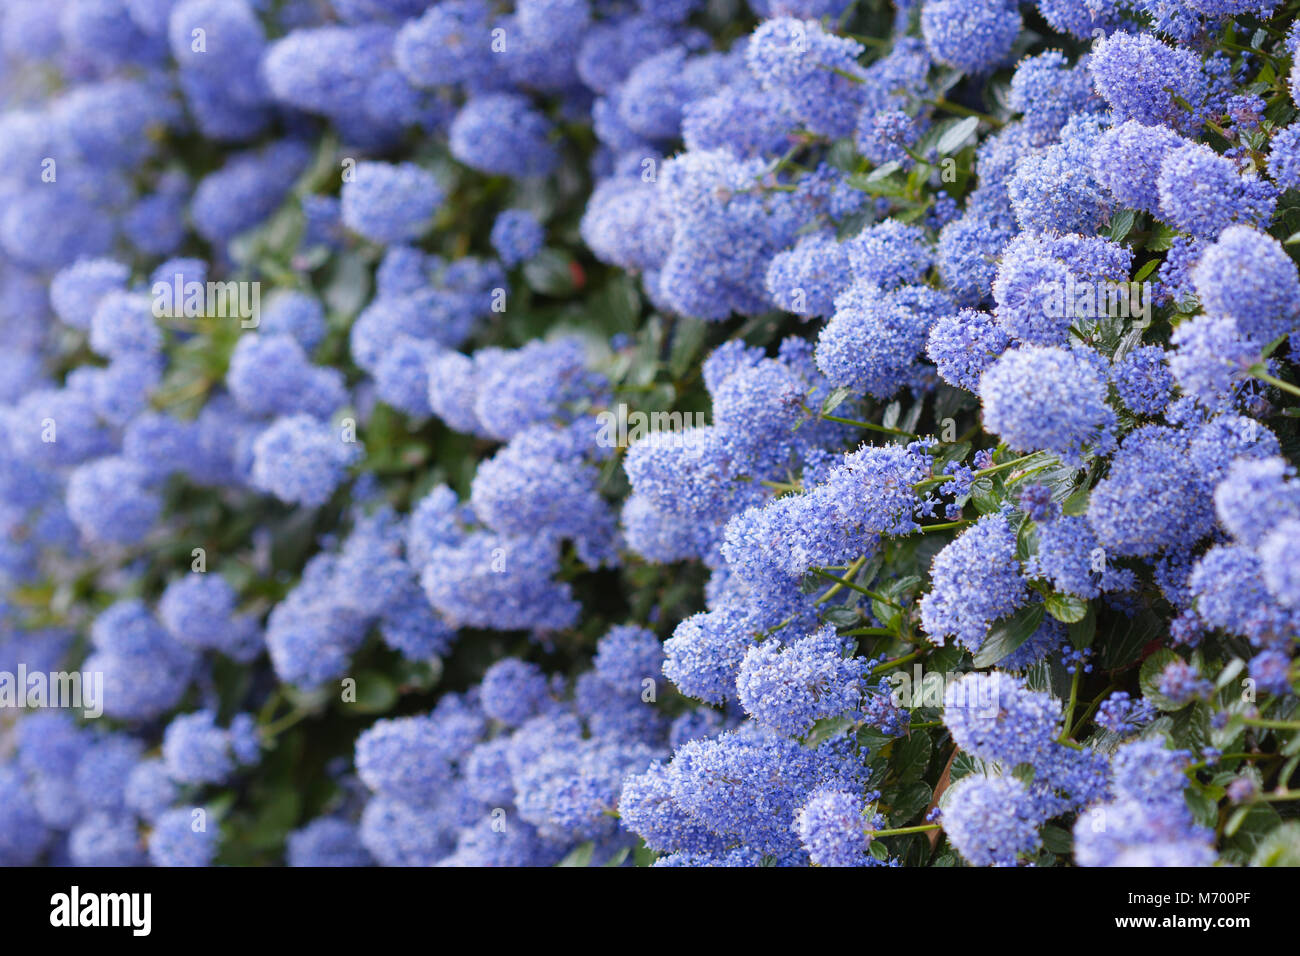 Beautiful bed of blooming Californian lilac flowers (Ceanothus thyrsiflorus repens). Shallow depth of field. Stock Photo